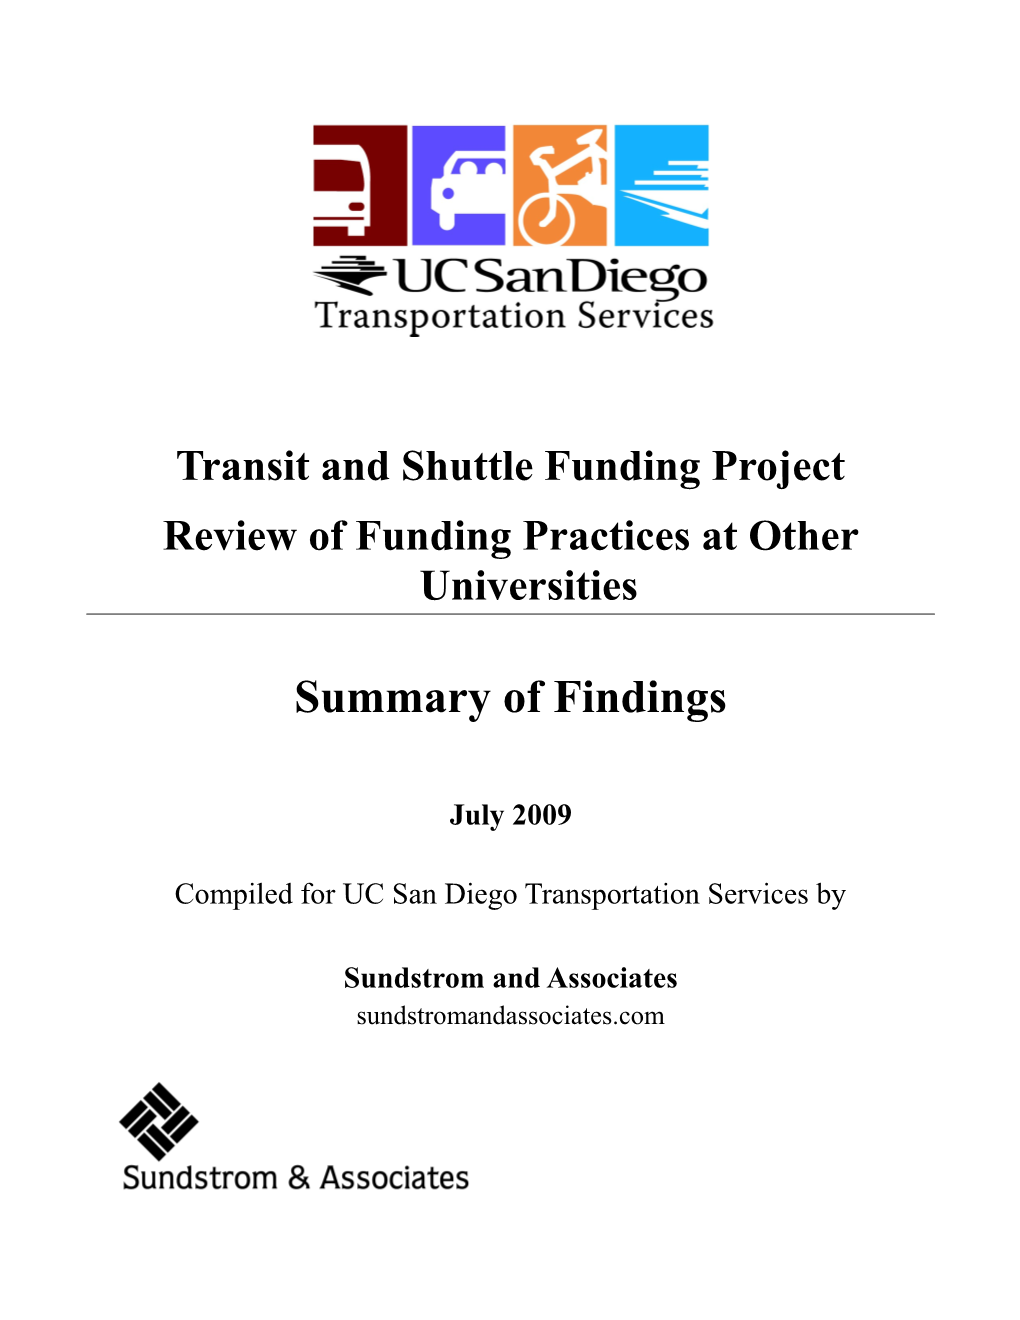 Transit and Shuttle Funding Project